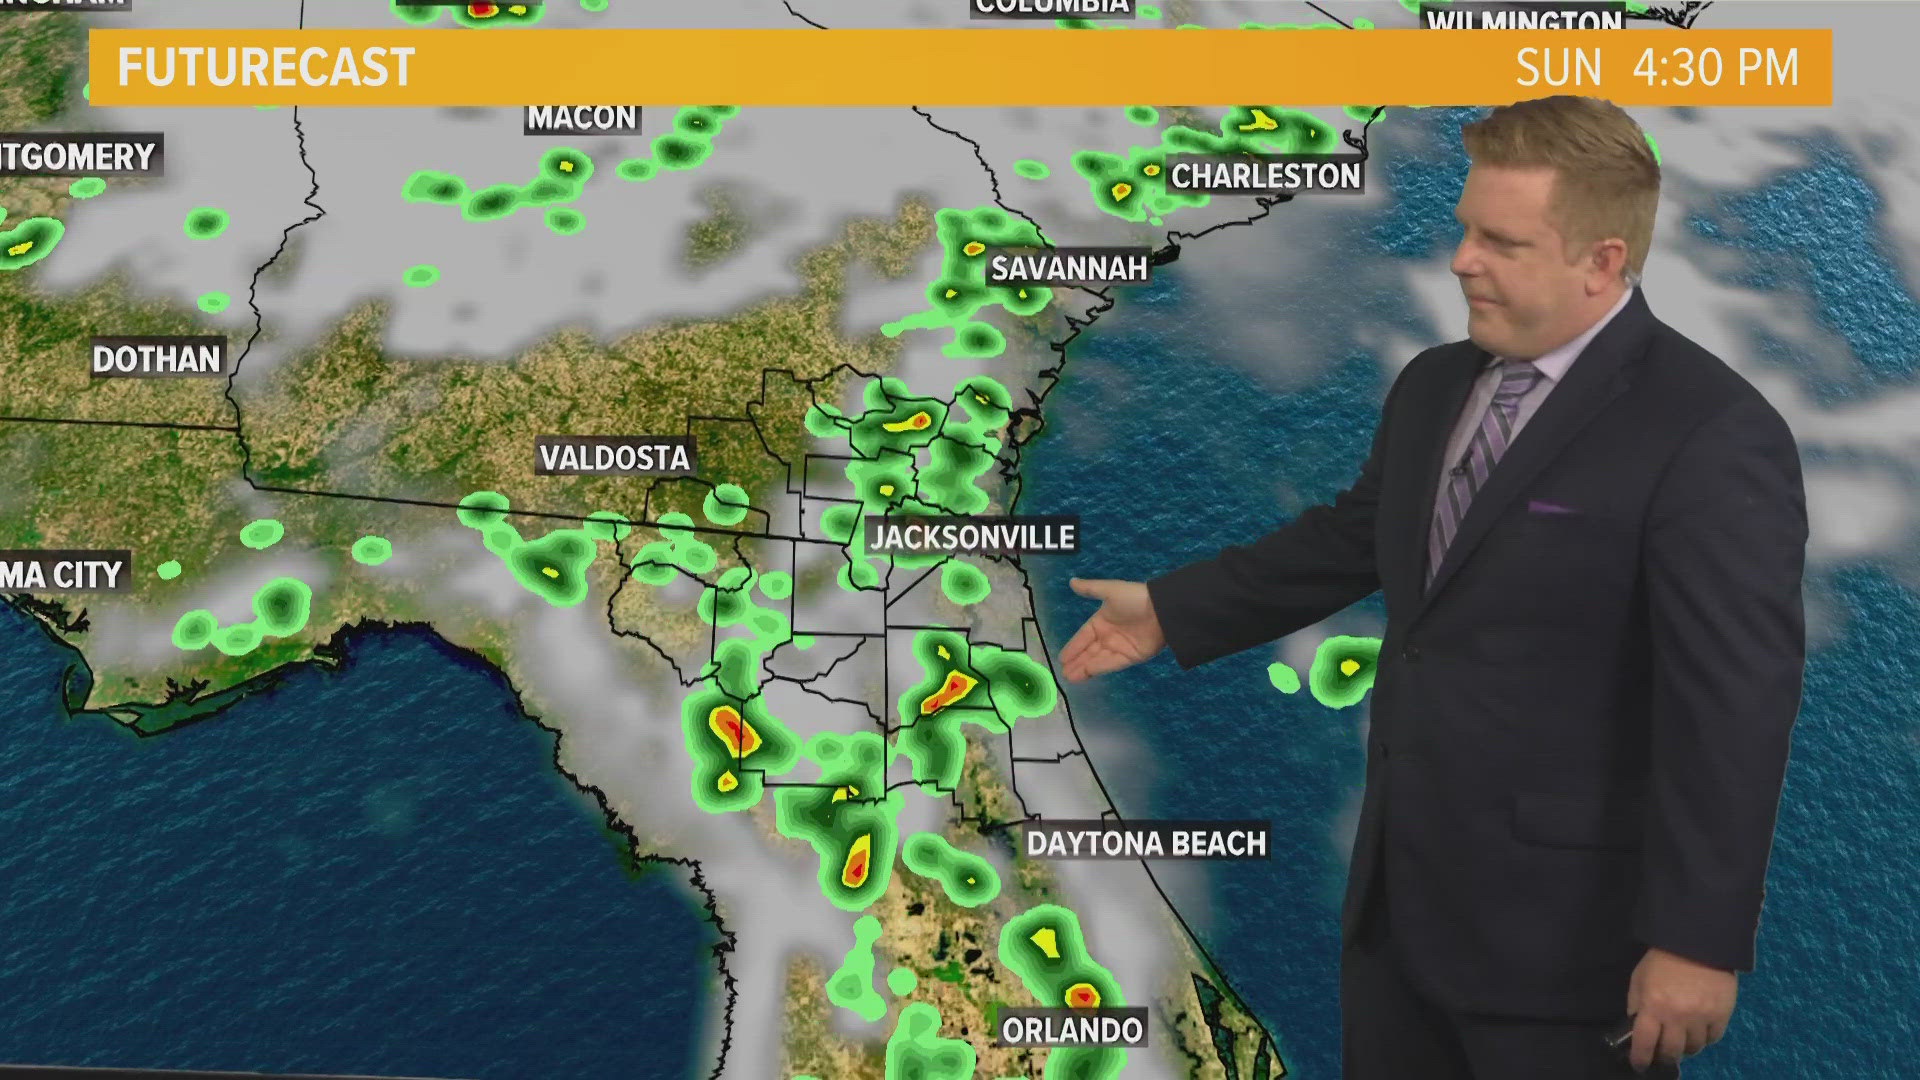 The heat returns with afternoon showers on the First Coast